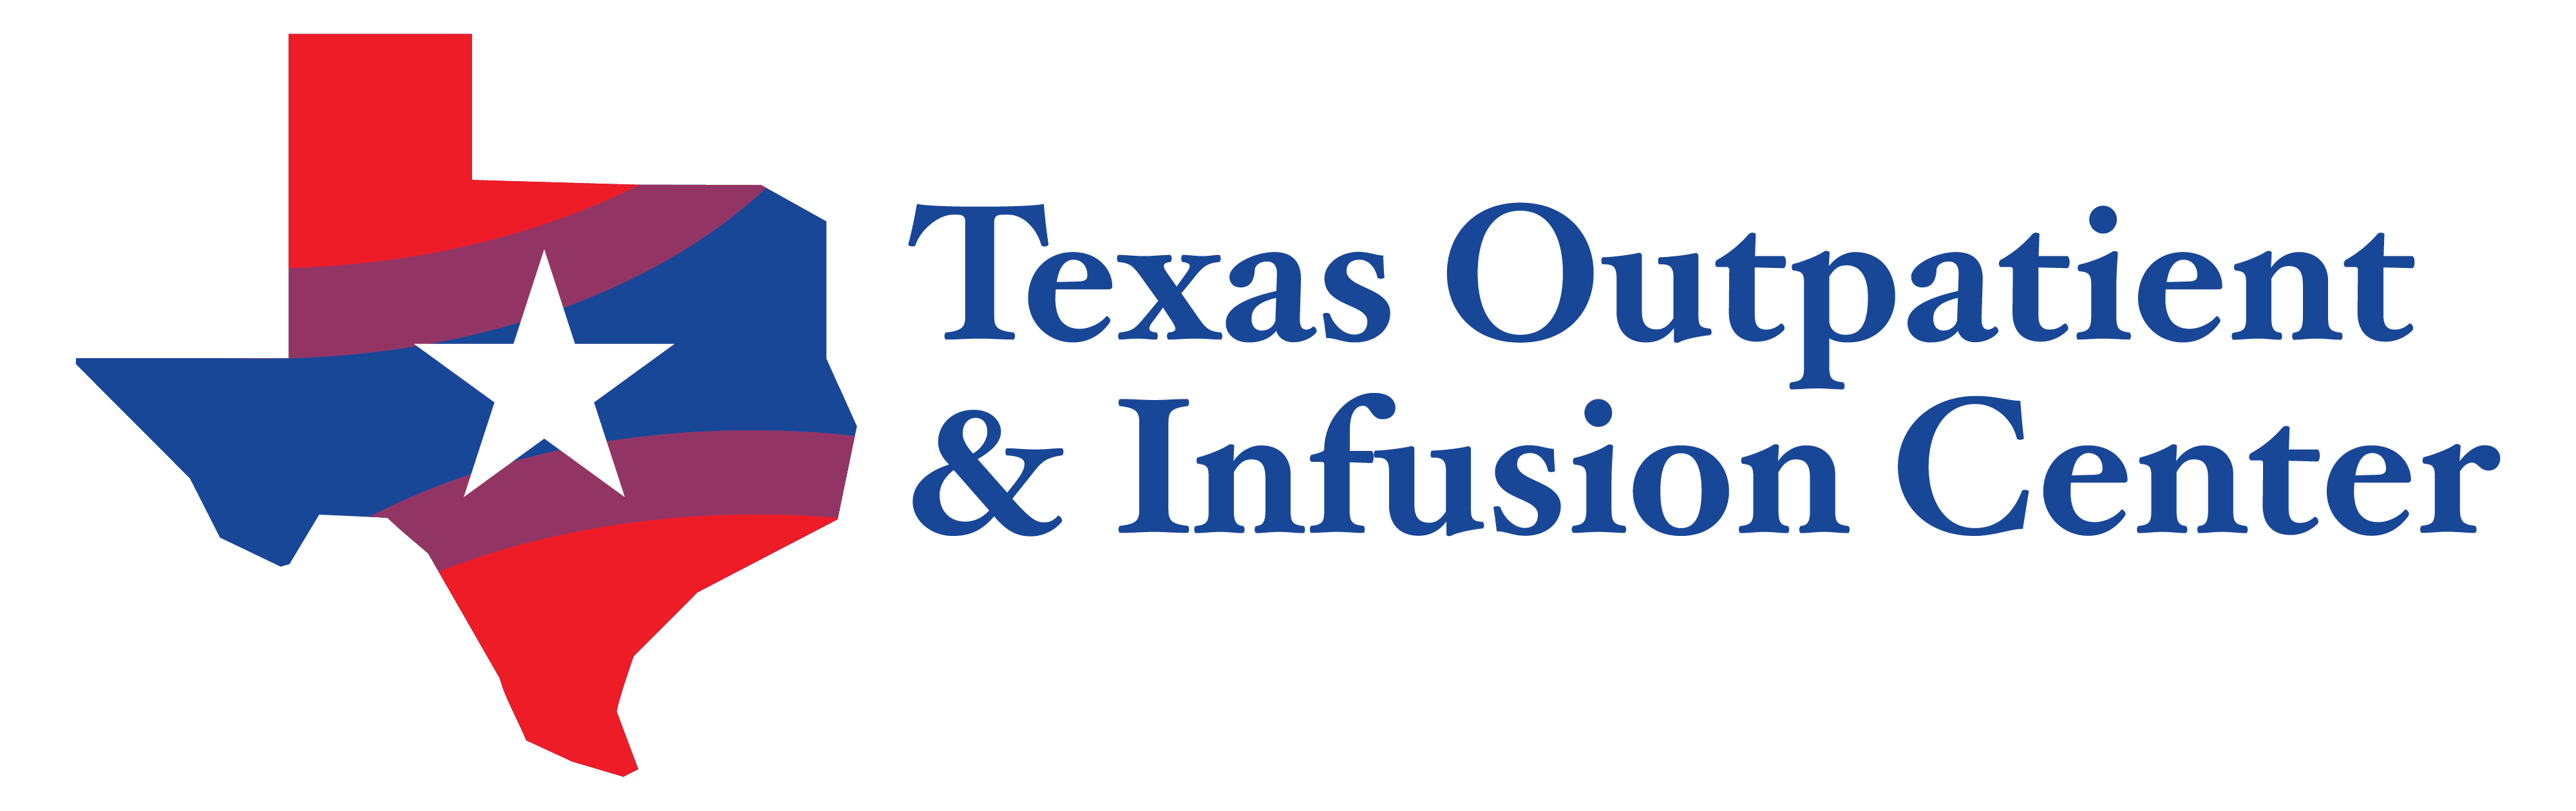 Texas Outpatient & Infusion Center